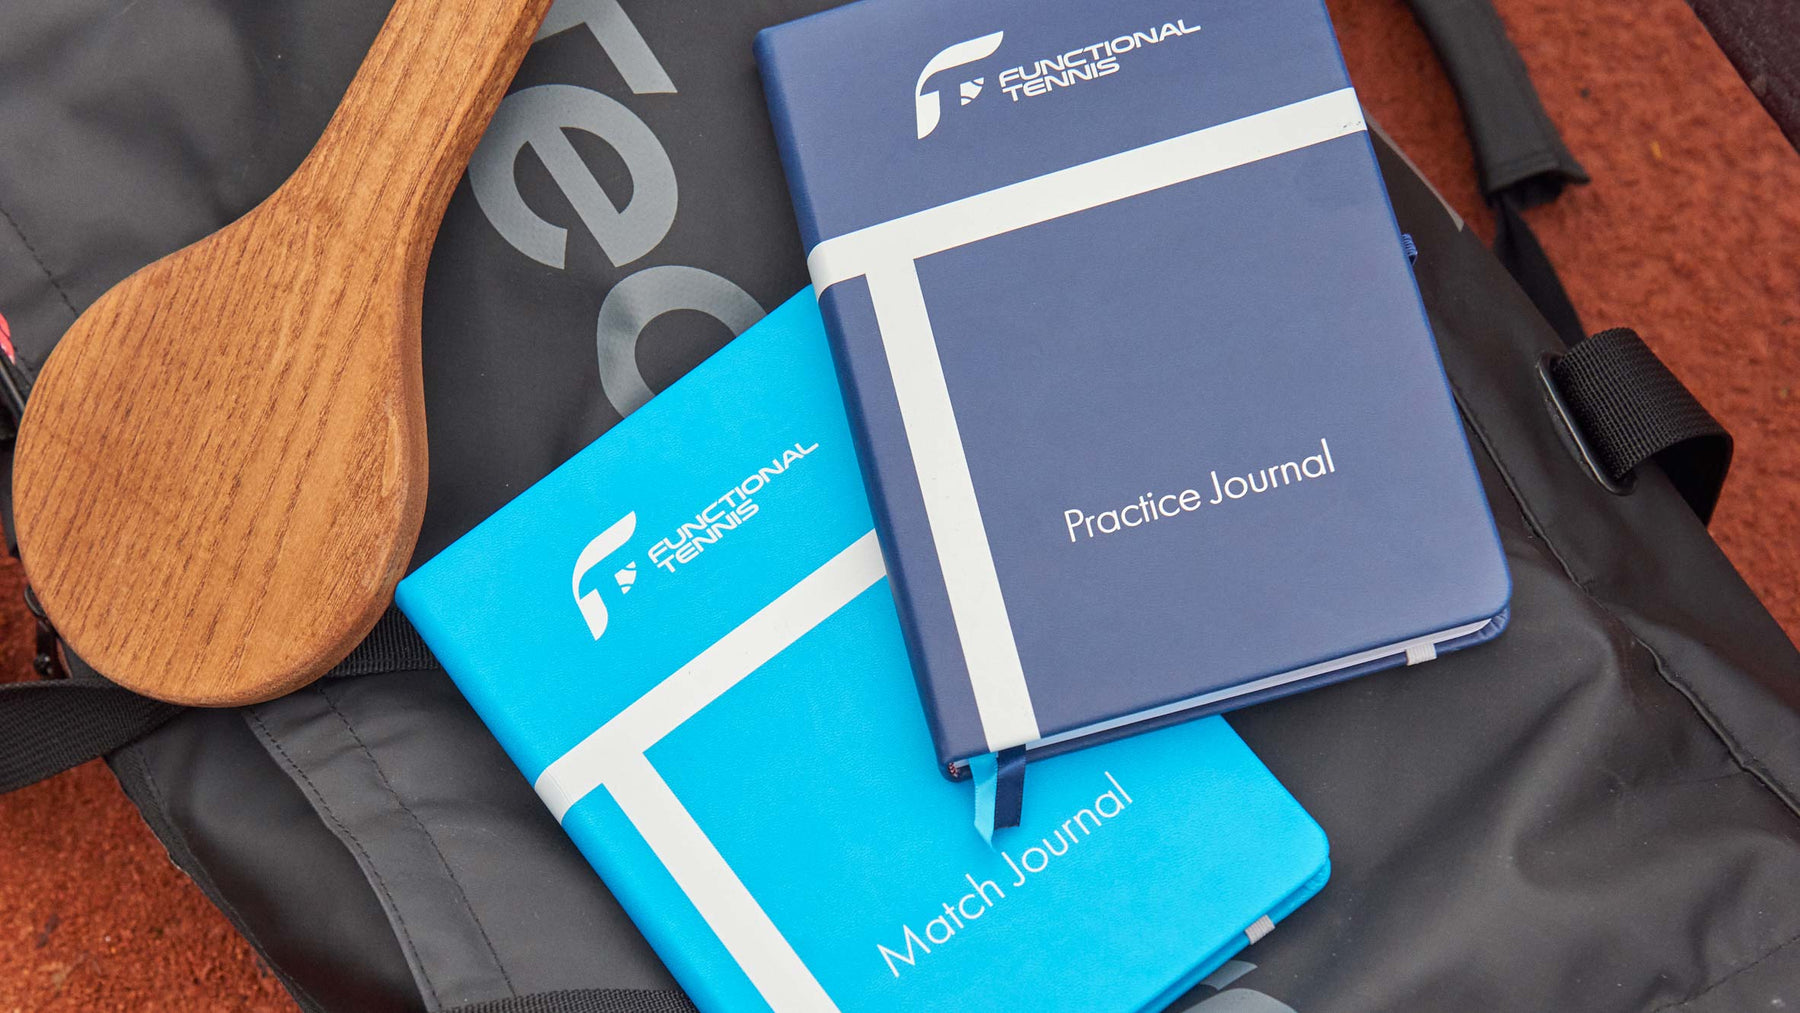 The match and practice journal, use these journals to give your matches and practice sessions a framework which allows oyu to evualate your performace everytime you step out on court.